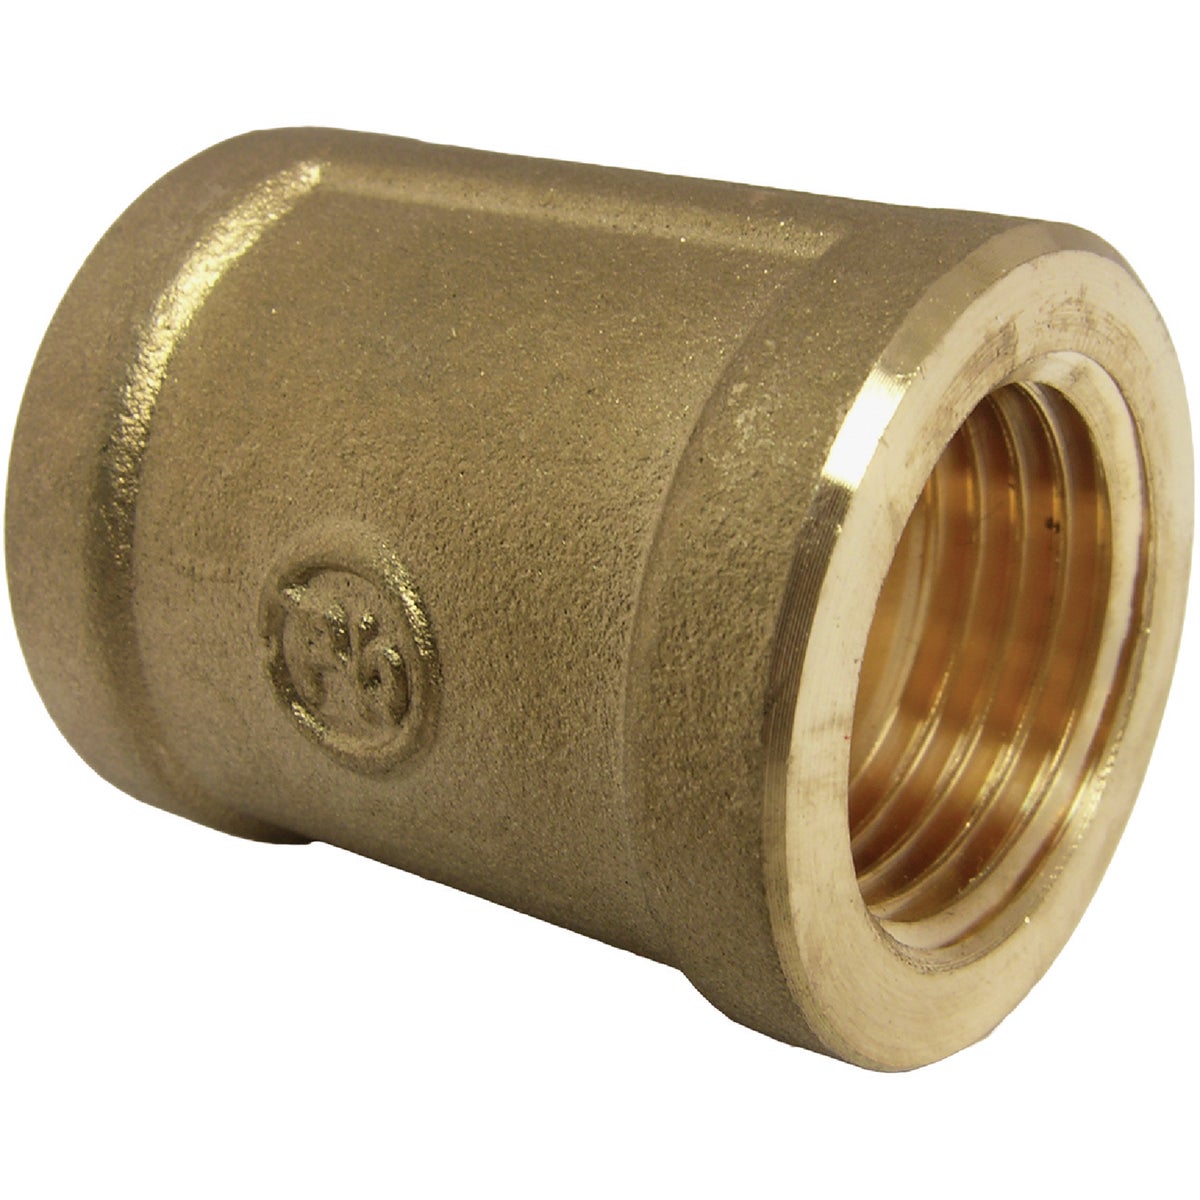 Lasco 1/2 In. FPT x 1/2 In. FPT Red Brass Coupling